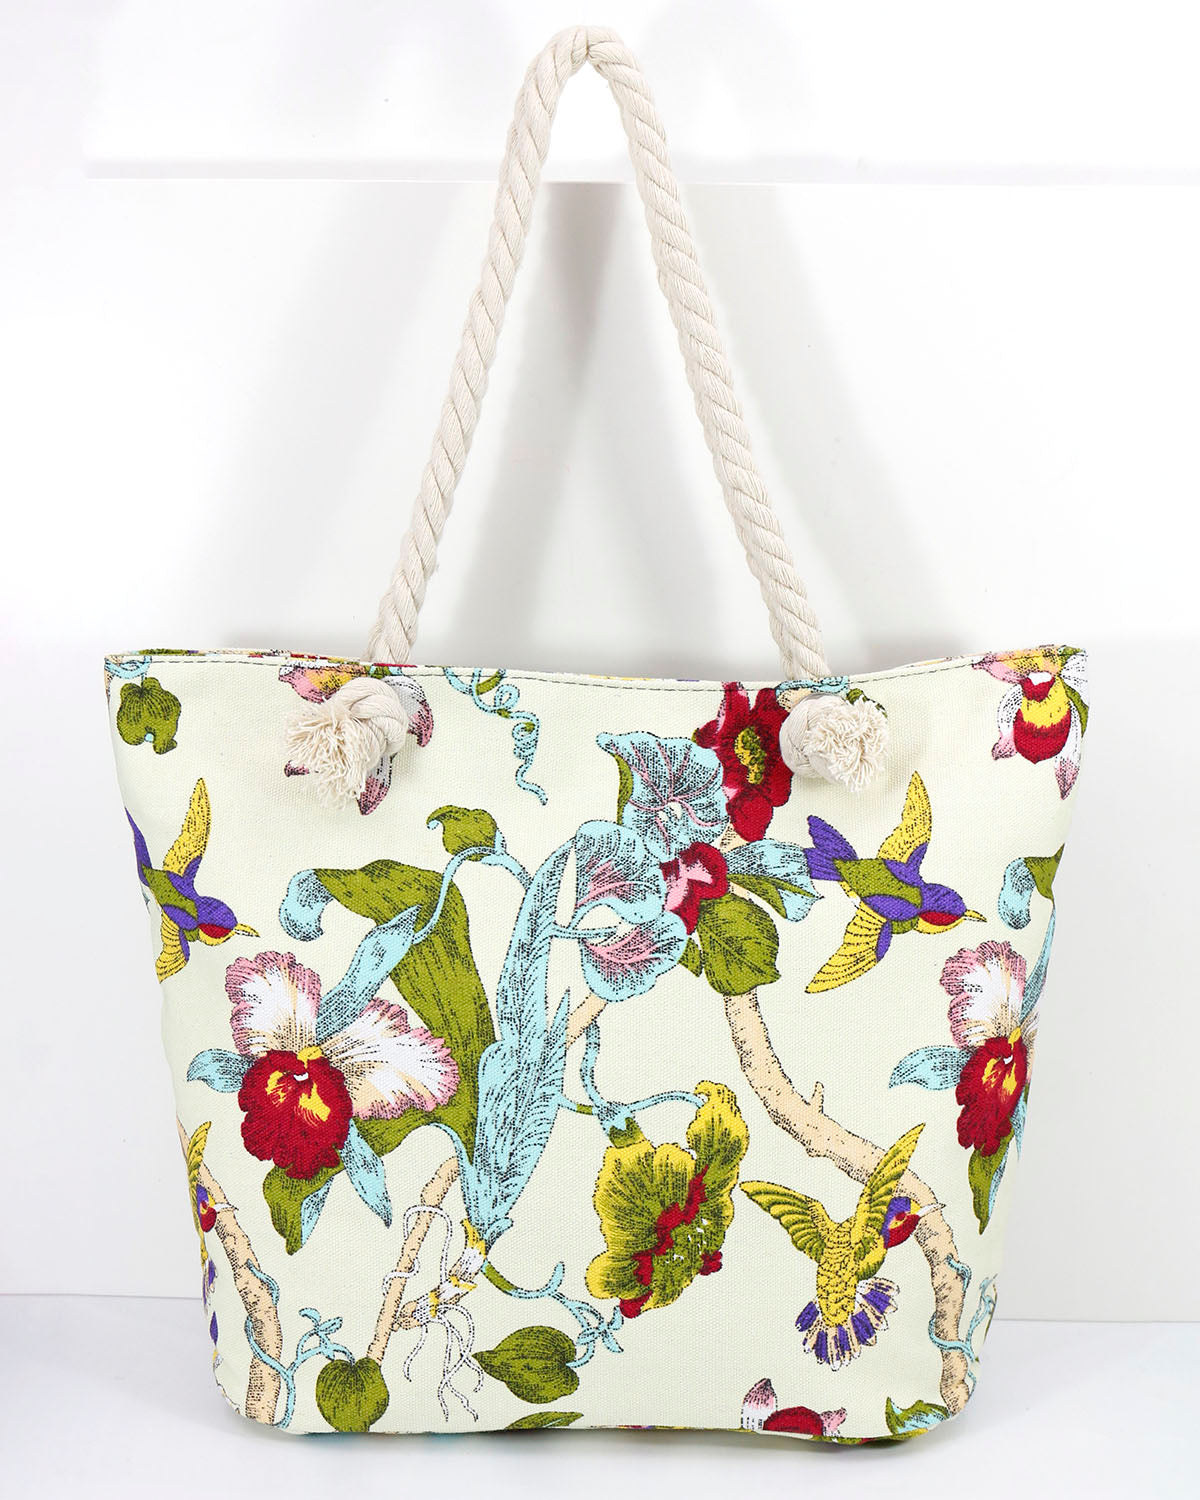 Buy VVWV Flower Printed Canvas Tote Bags For Women, Stylish